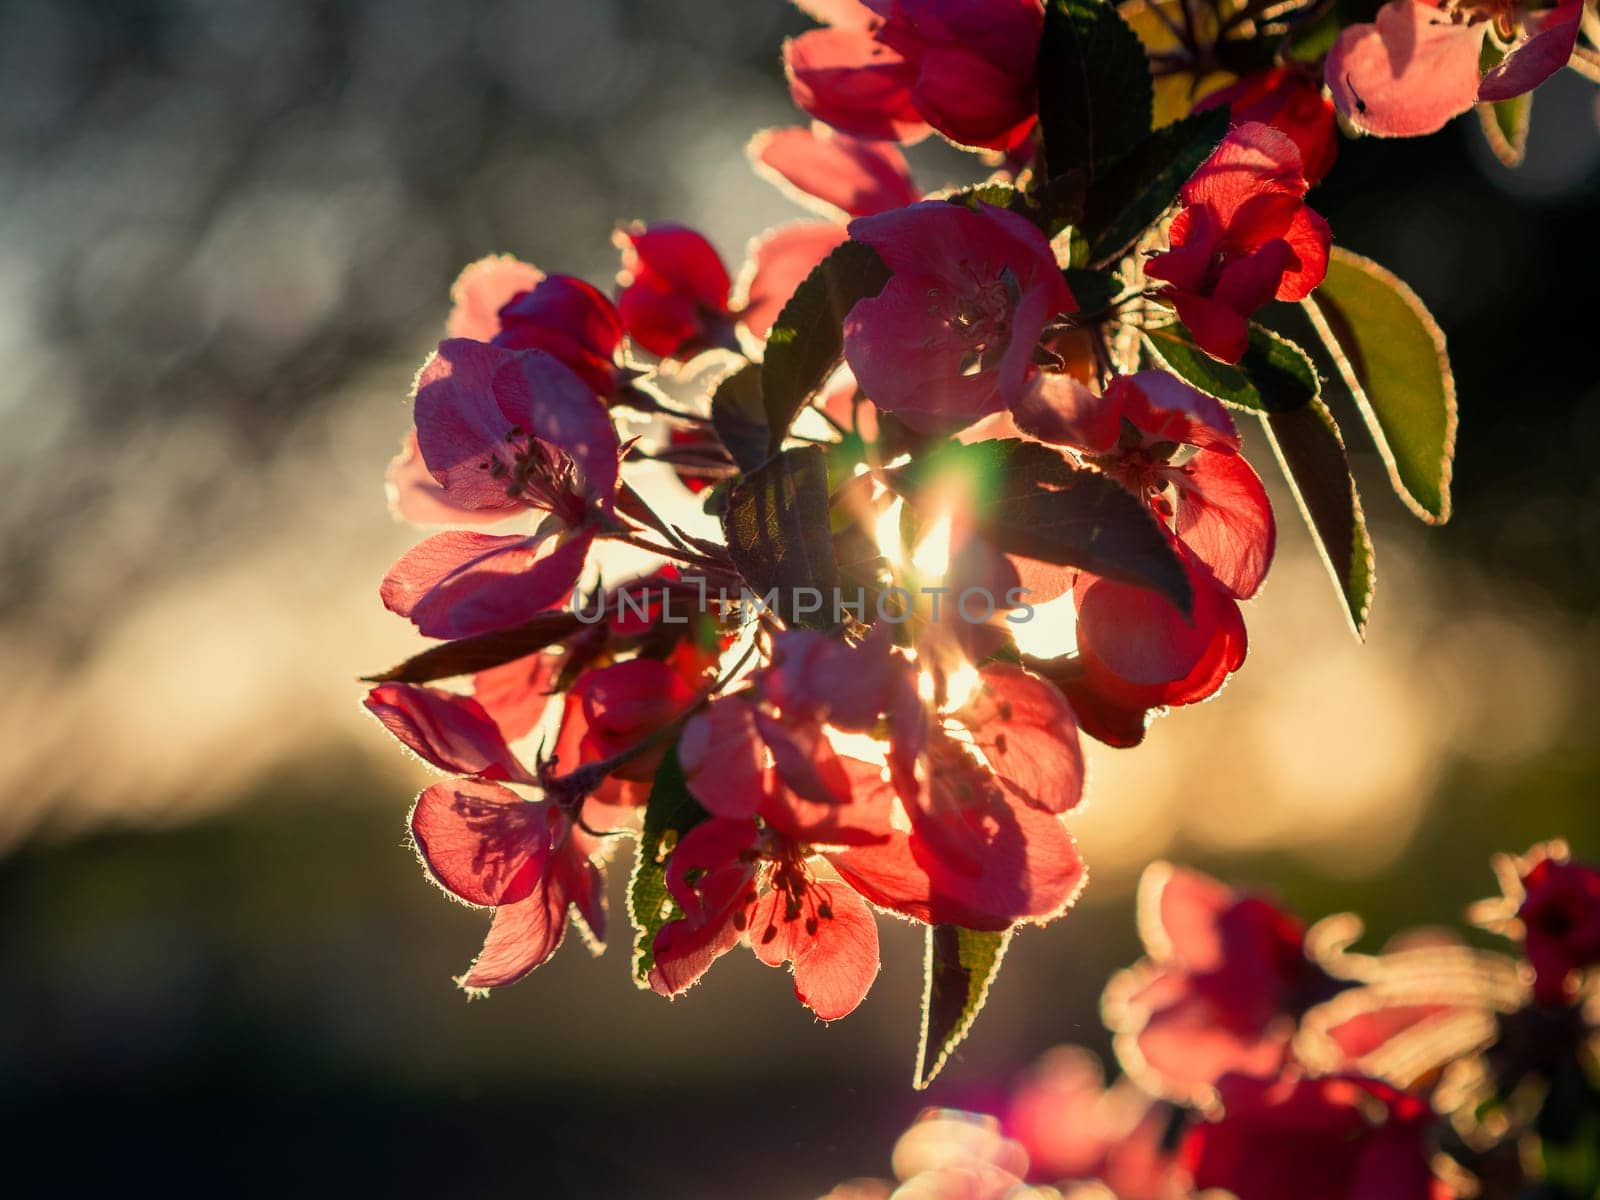 Branches of apple blossoming, pink flowers. Apple blossom panorama wallpaper background. Spring flowering garden fruit tree.